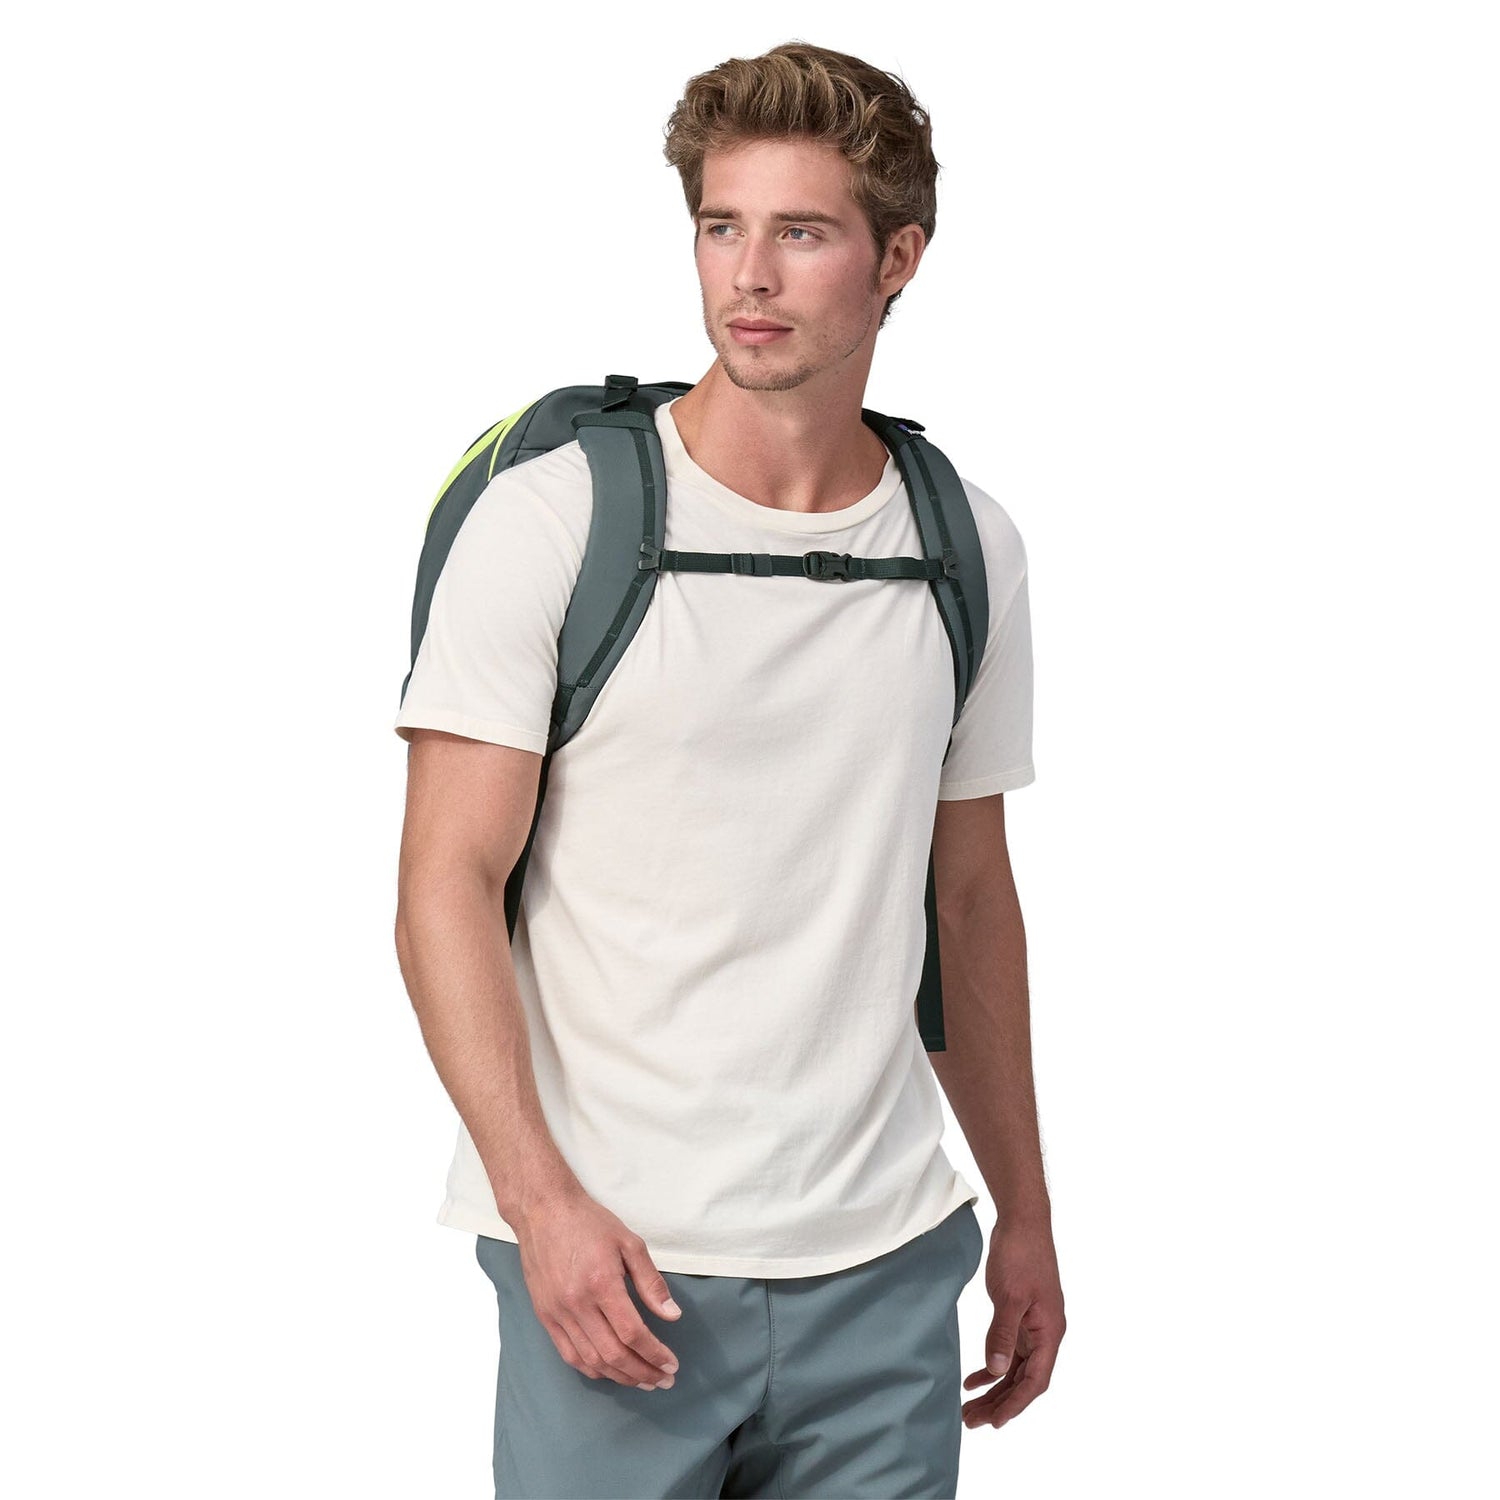 Patagonia - Refugio Day Pack 30L - Recycled Polyester & Recycled Nylon - Weekendbee - sustainable sportswear